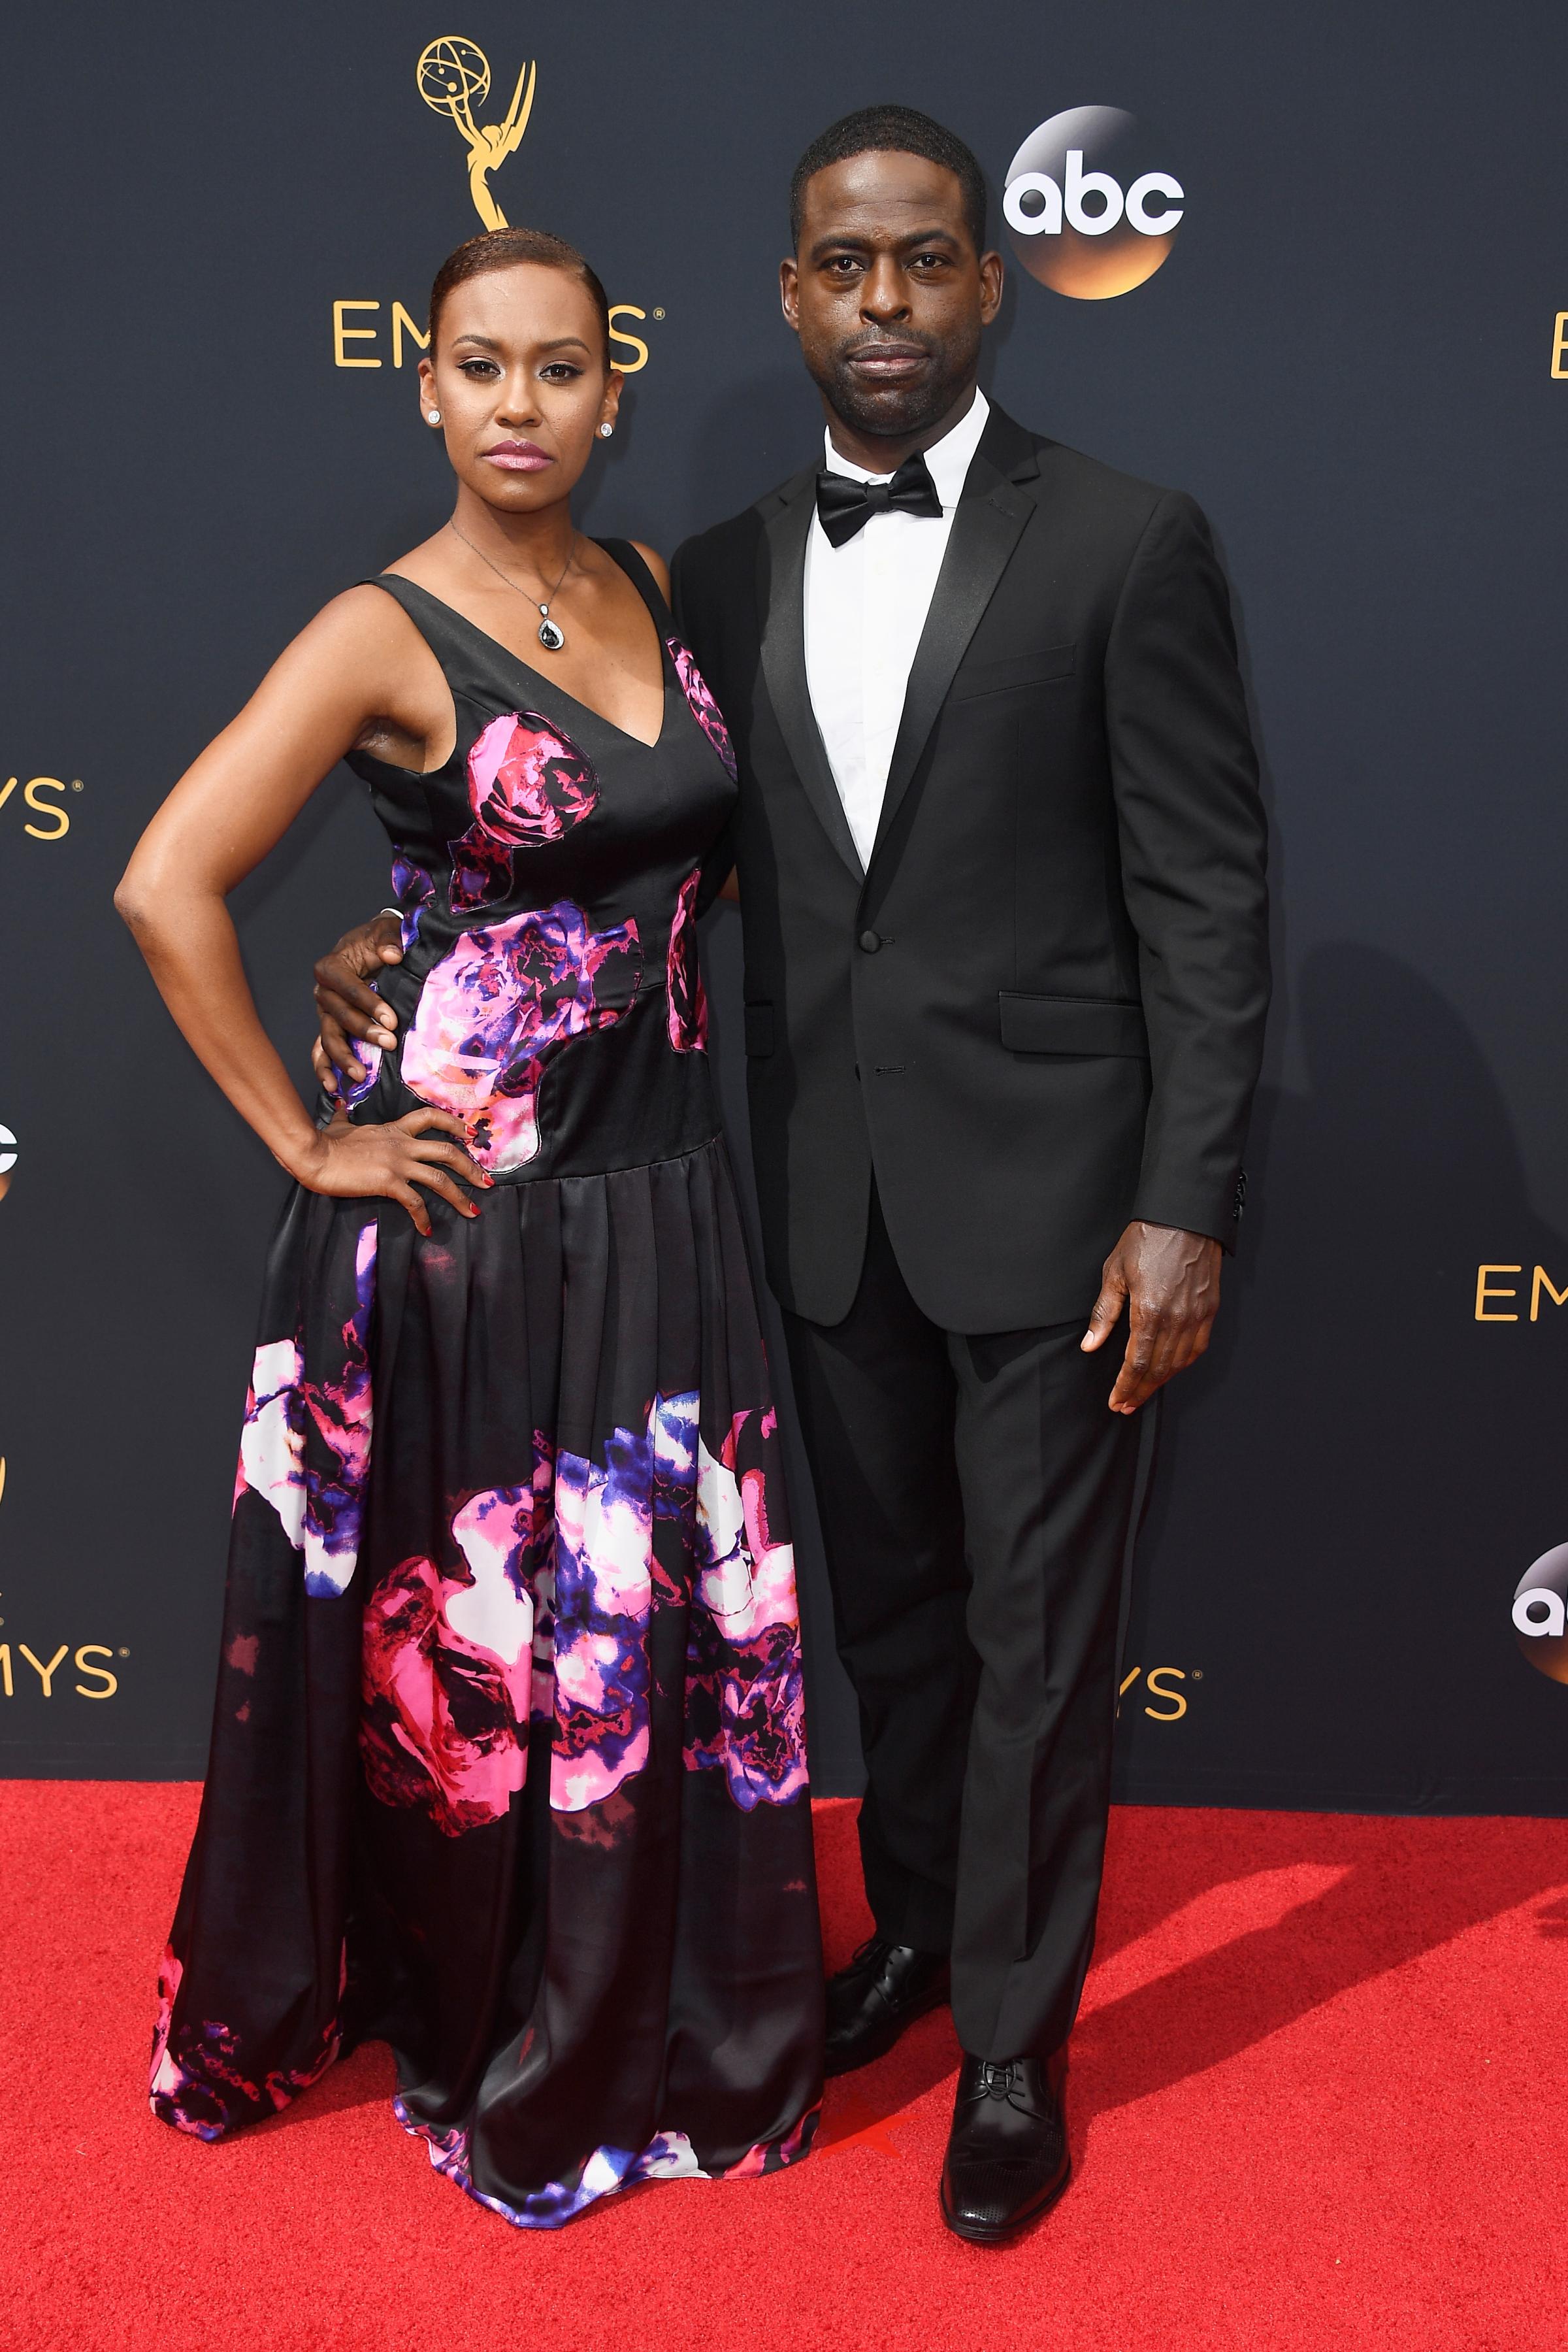 Sterling K. Brown and Ryan Michelle Bathe arrive at the 68th Annual Primetime Emmy Awards at Microsoft Theater on September 18, 2016 in Los Angeles.